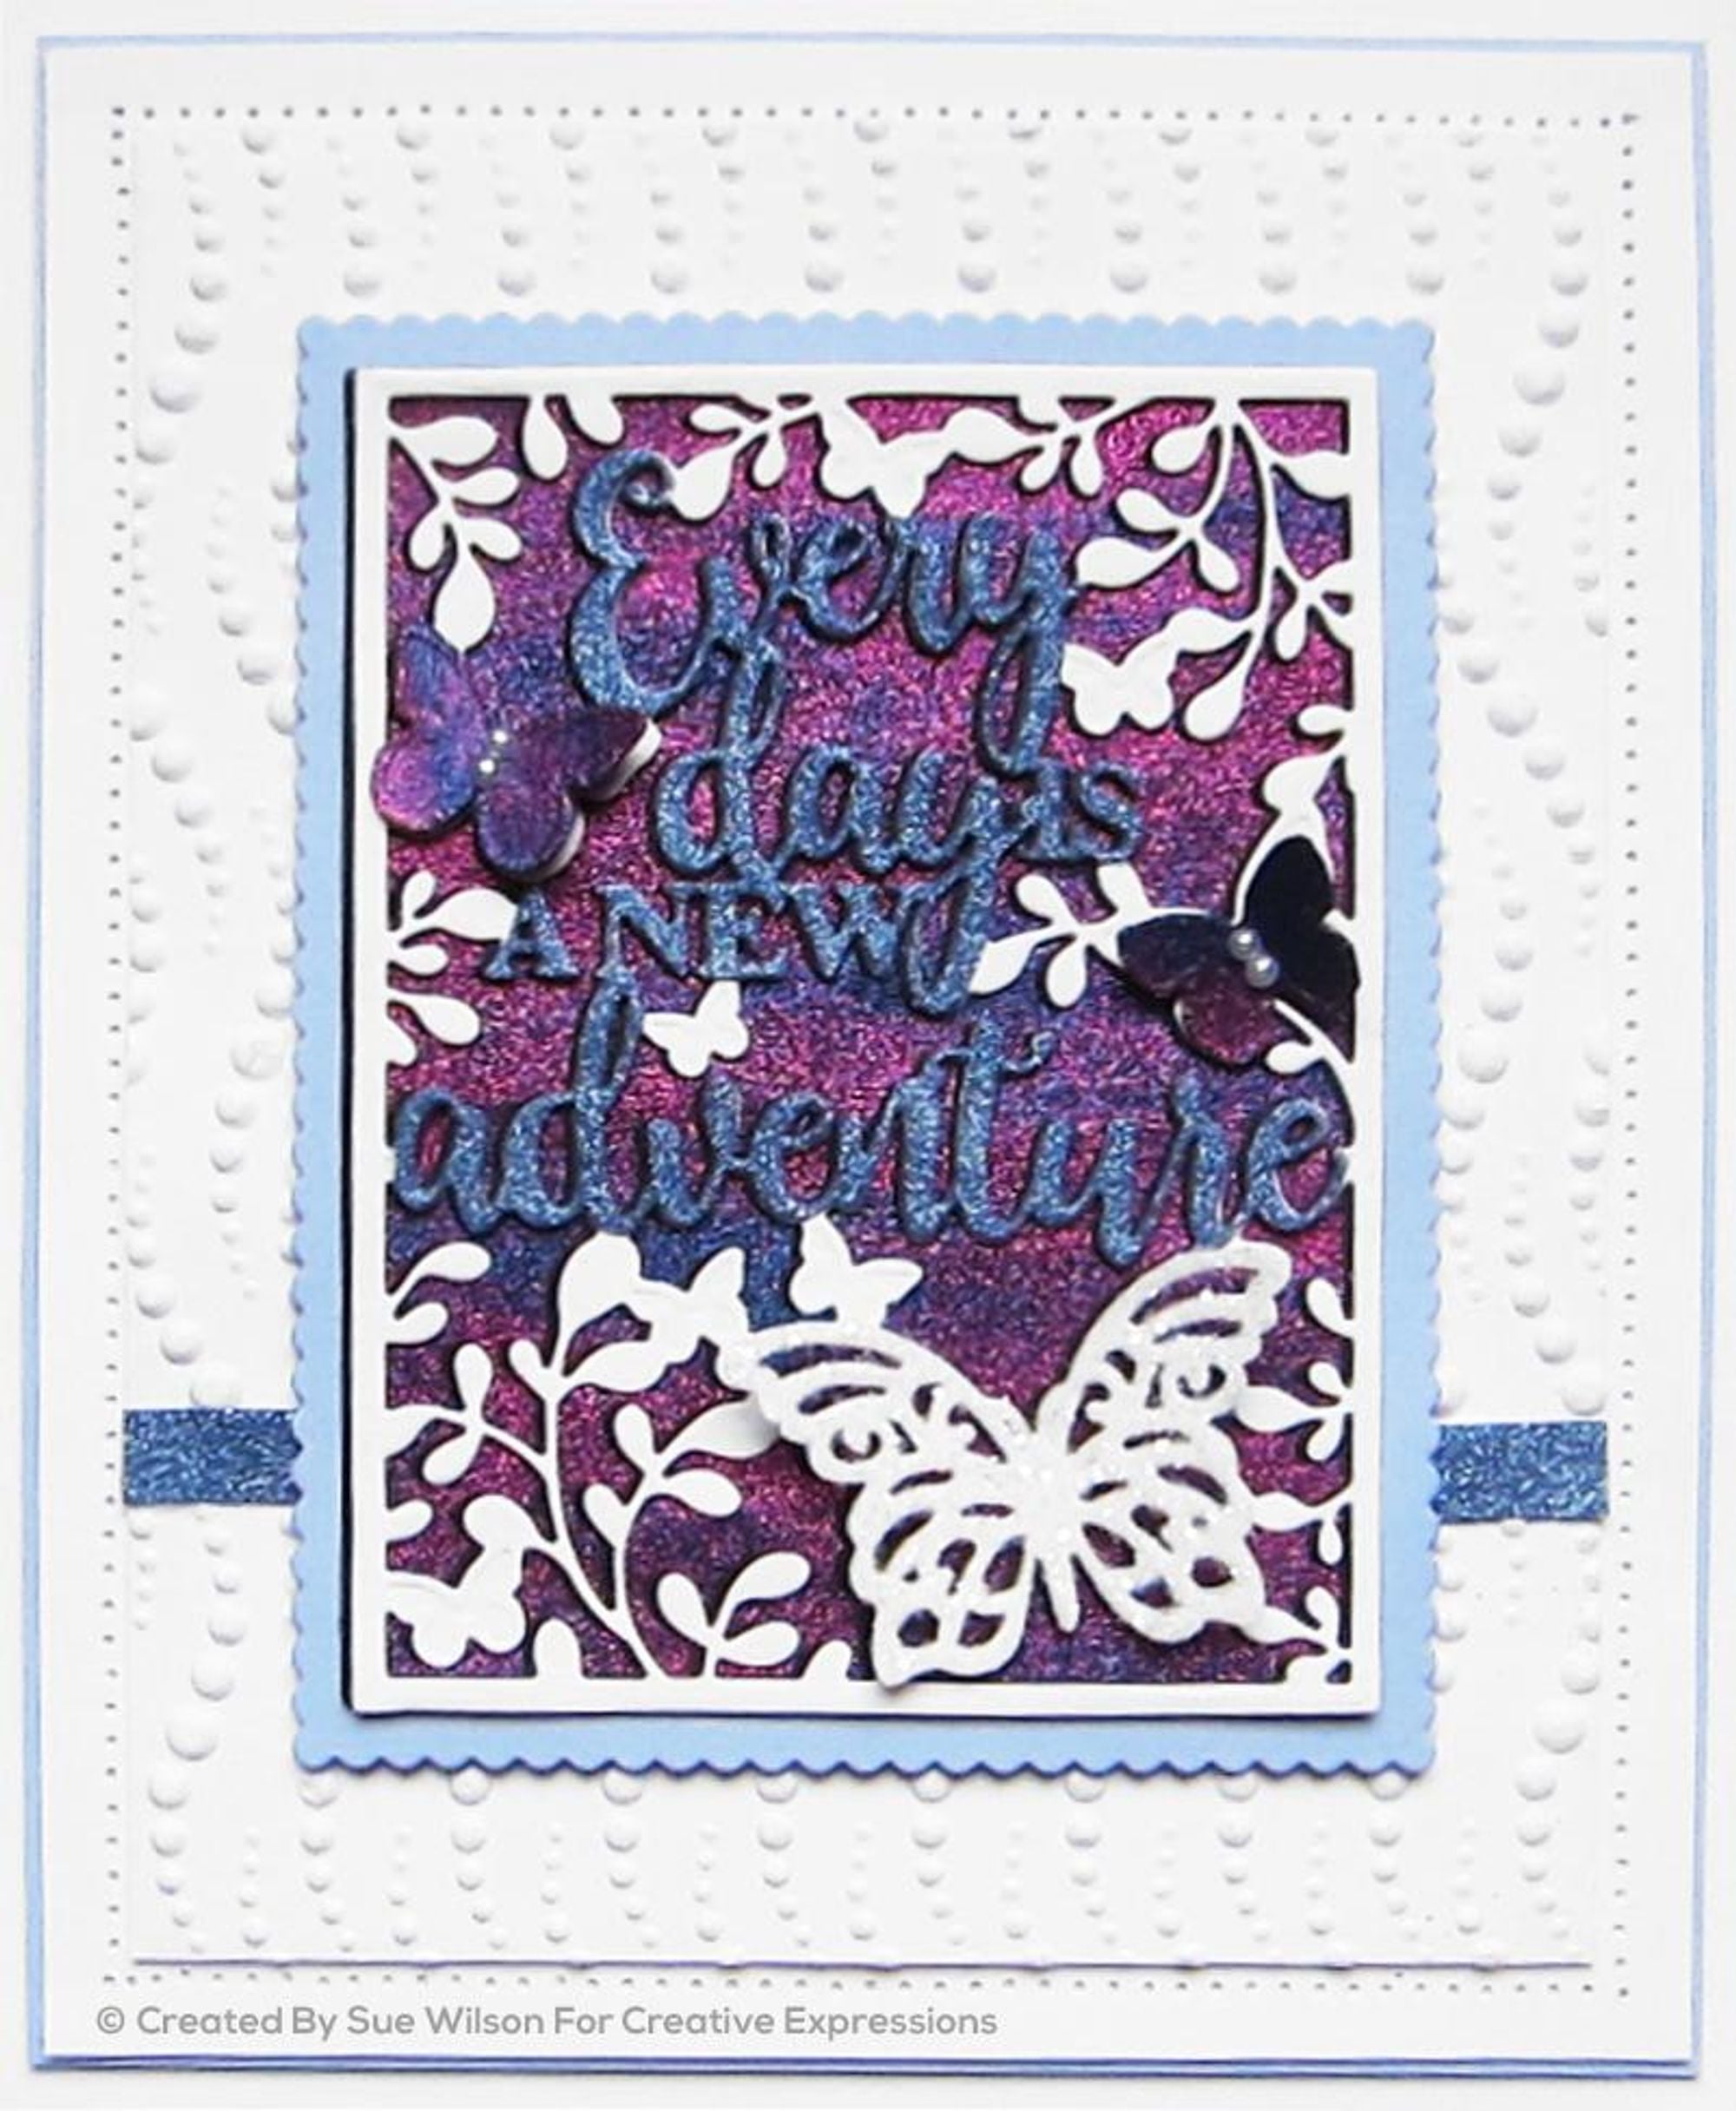 Sue Wilson  All In One Every Day Is A New Adventure Craft Die